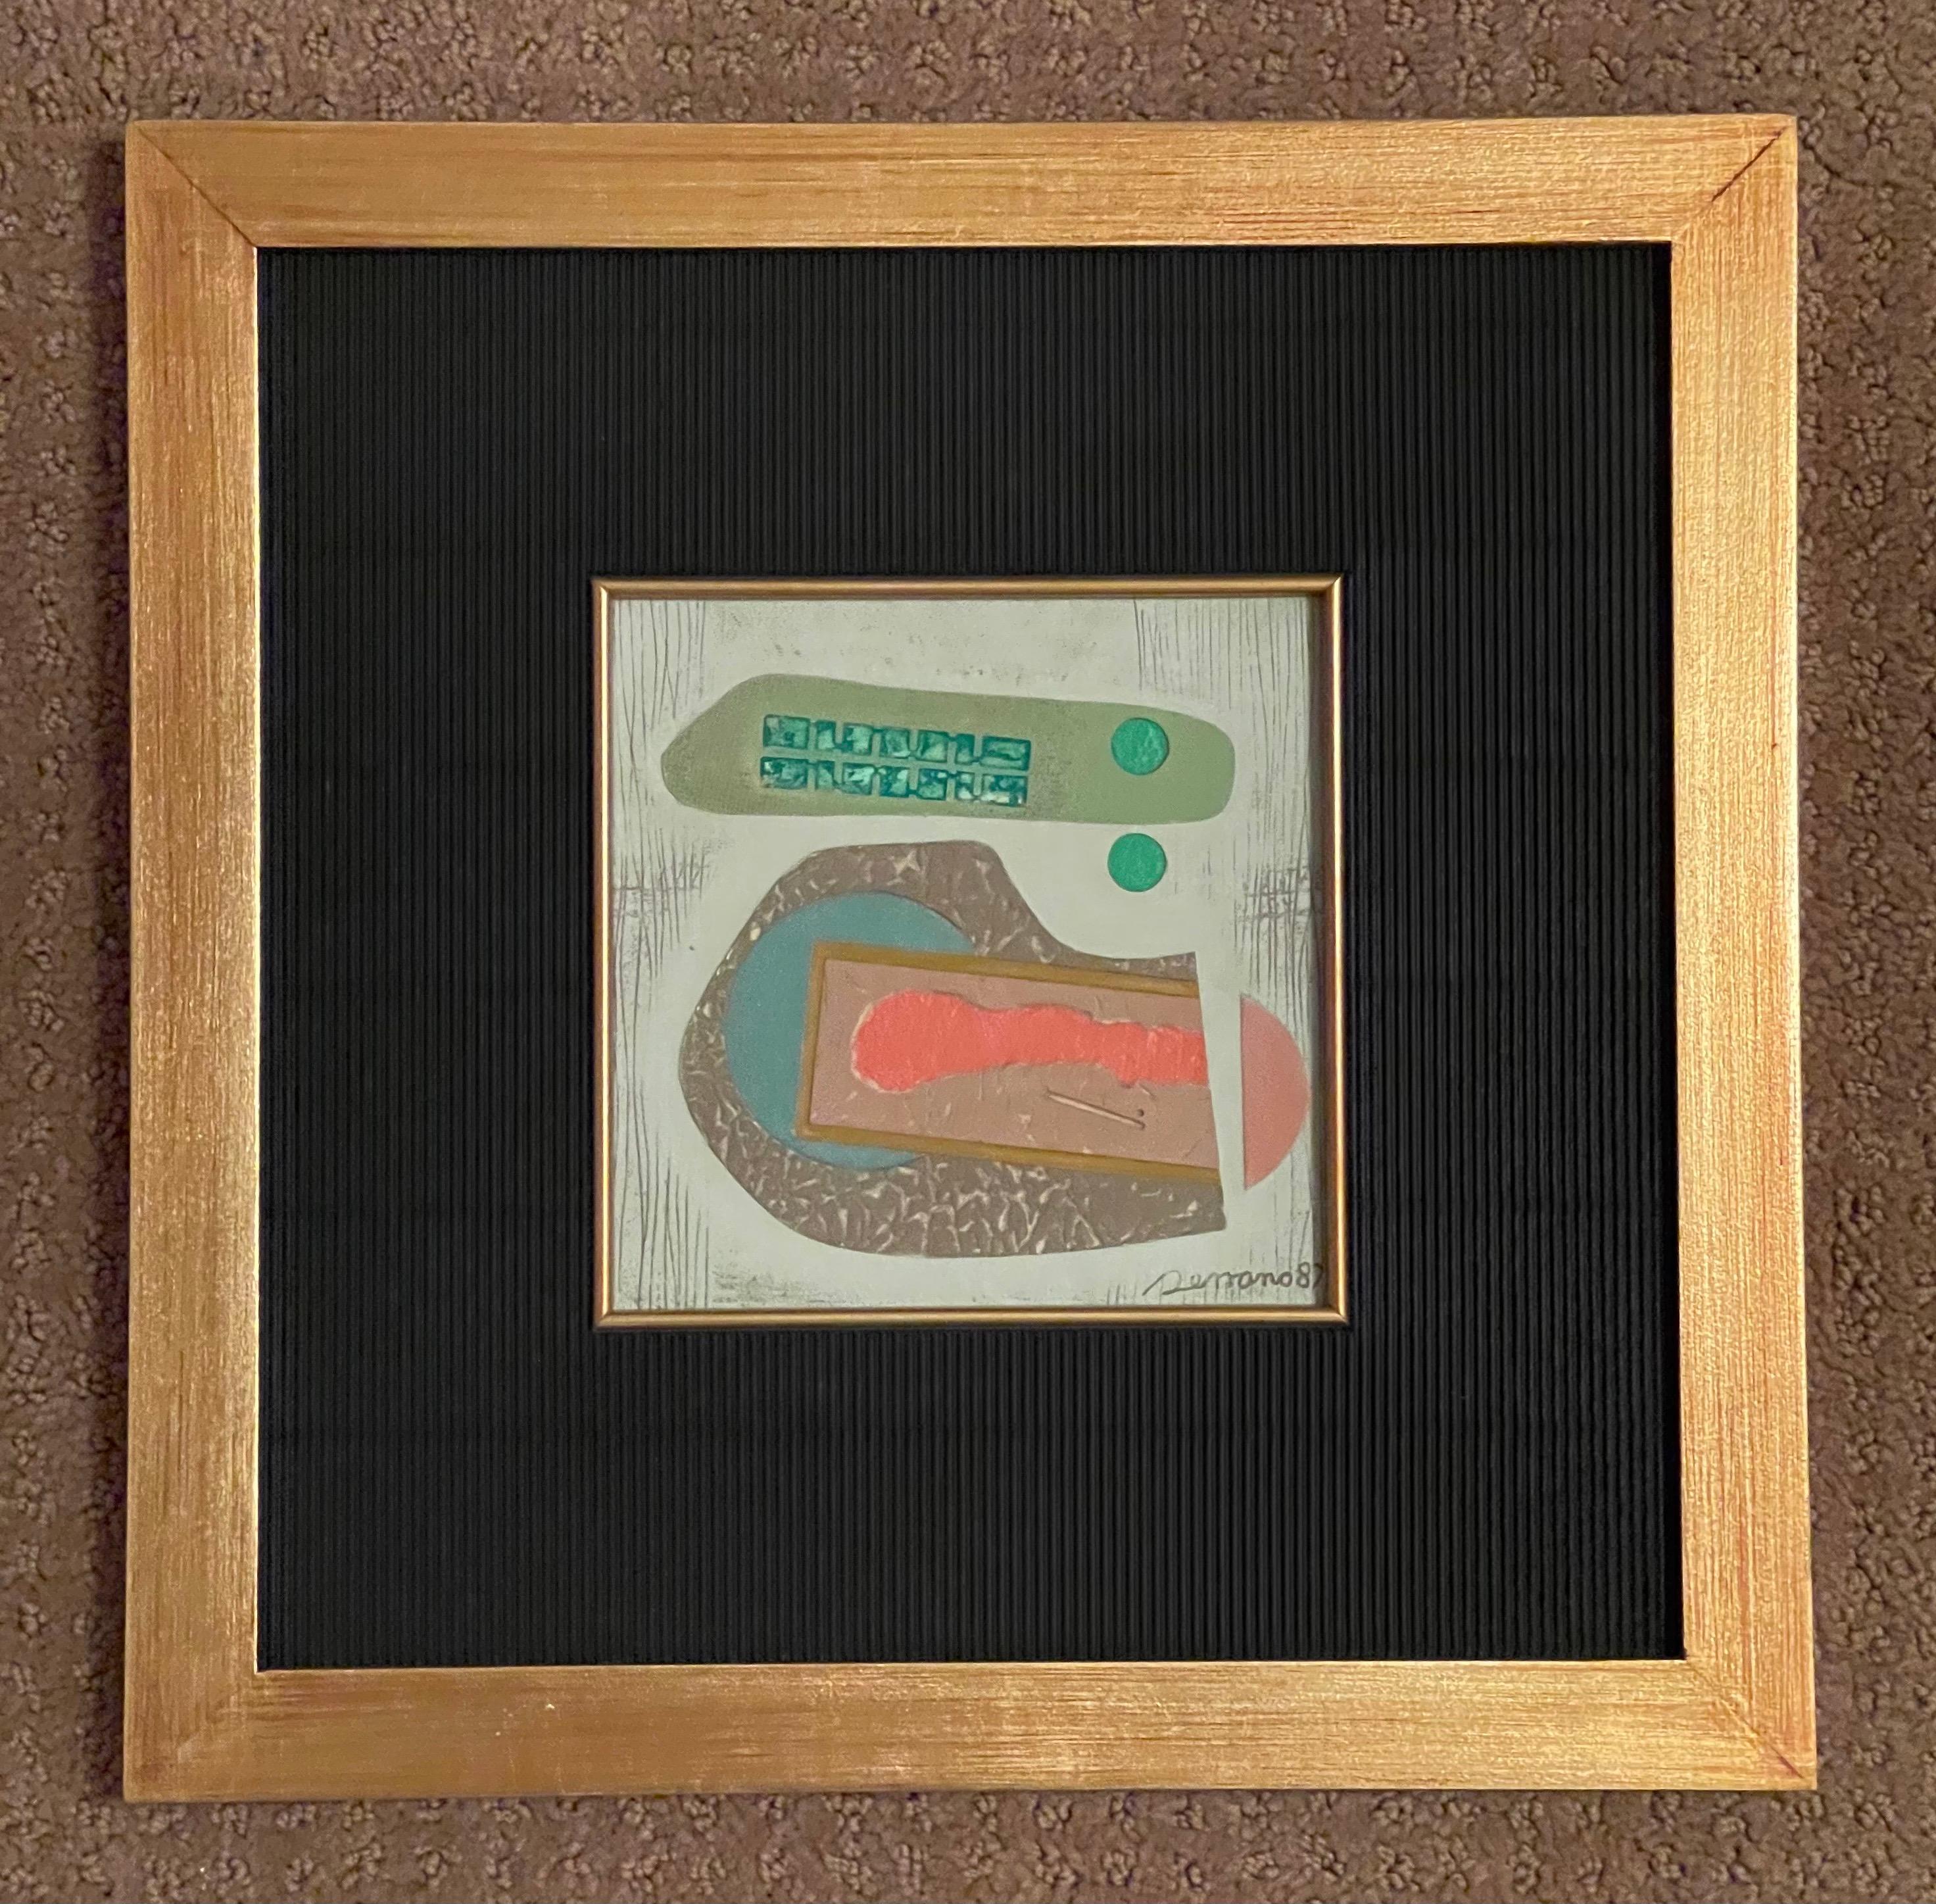 Post Modern mixed media three dimensional abstract by listed Mexican artist Jose Luis Serrano, circa 1982. Framed and mounted on board measuring 13.75